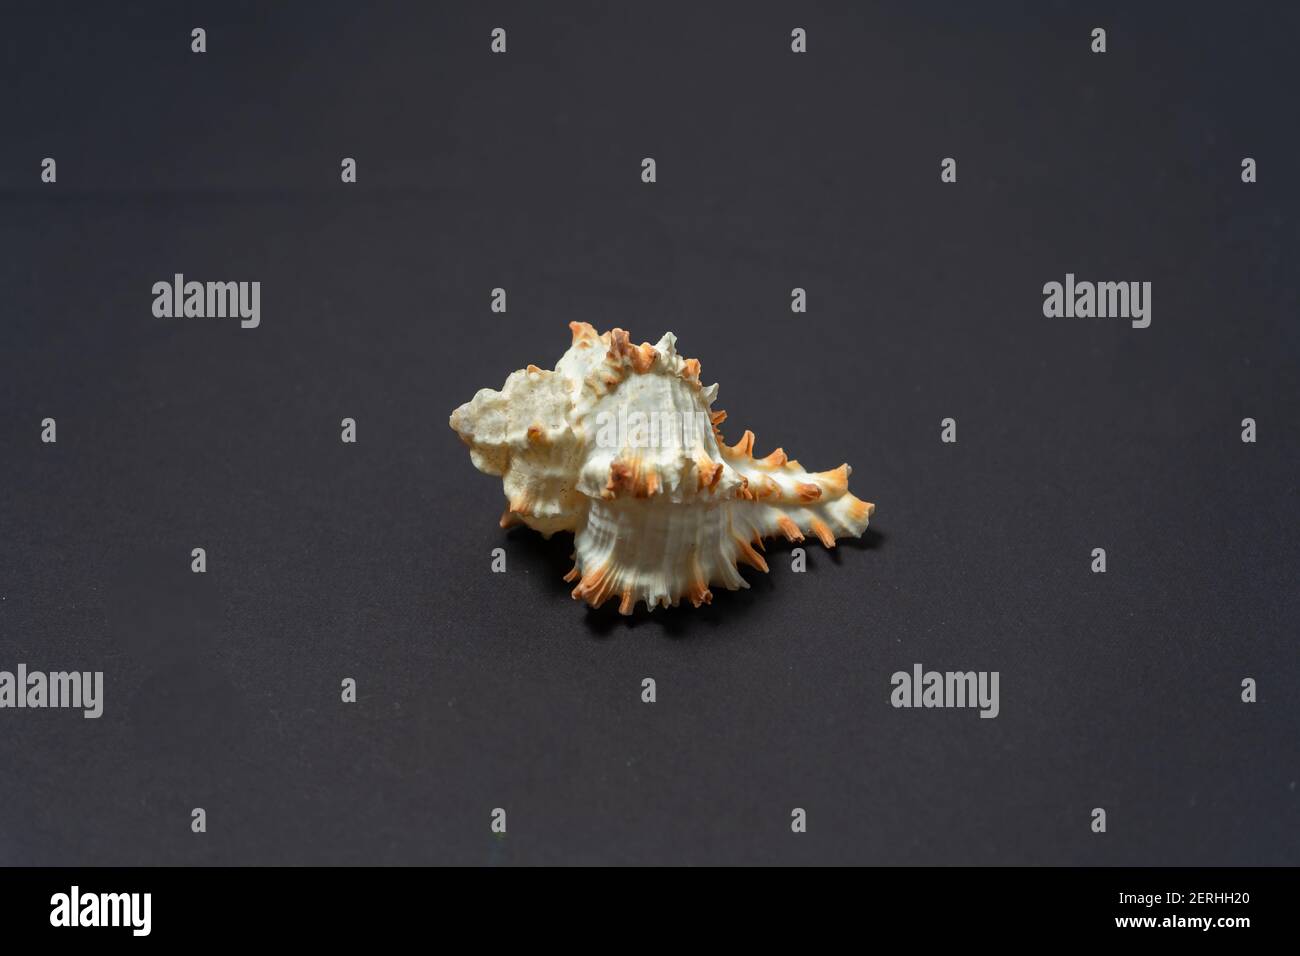 Sea snail shell, genus Murex, with ornamentation on a black background. Stock Photo